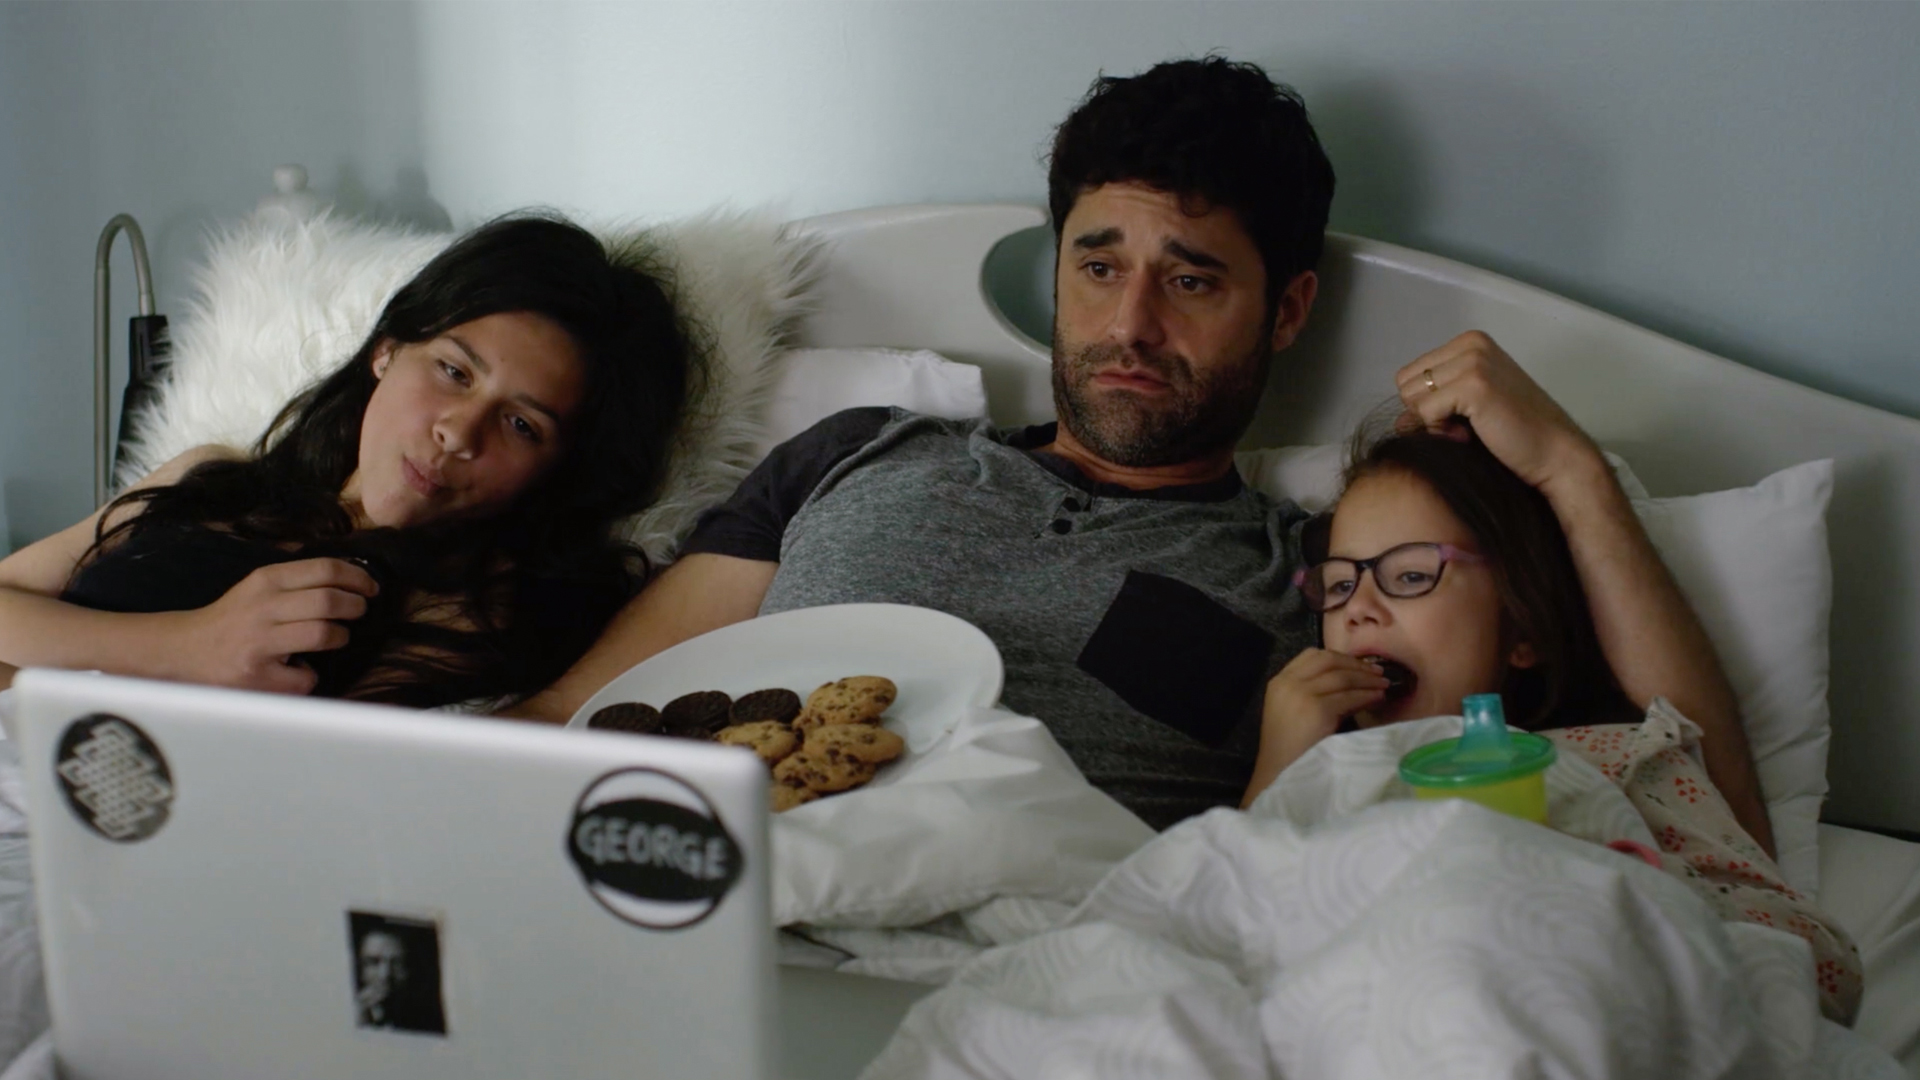 'Bring Me an Avocado' is a Slice of Life You Need to Watch